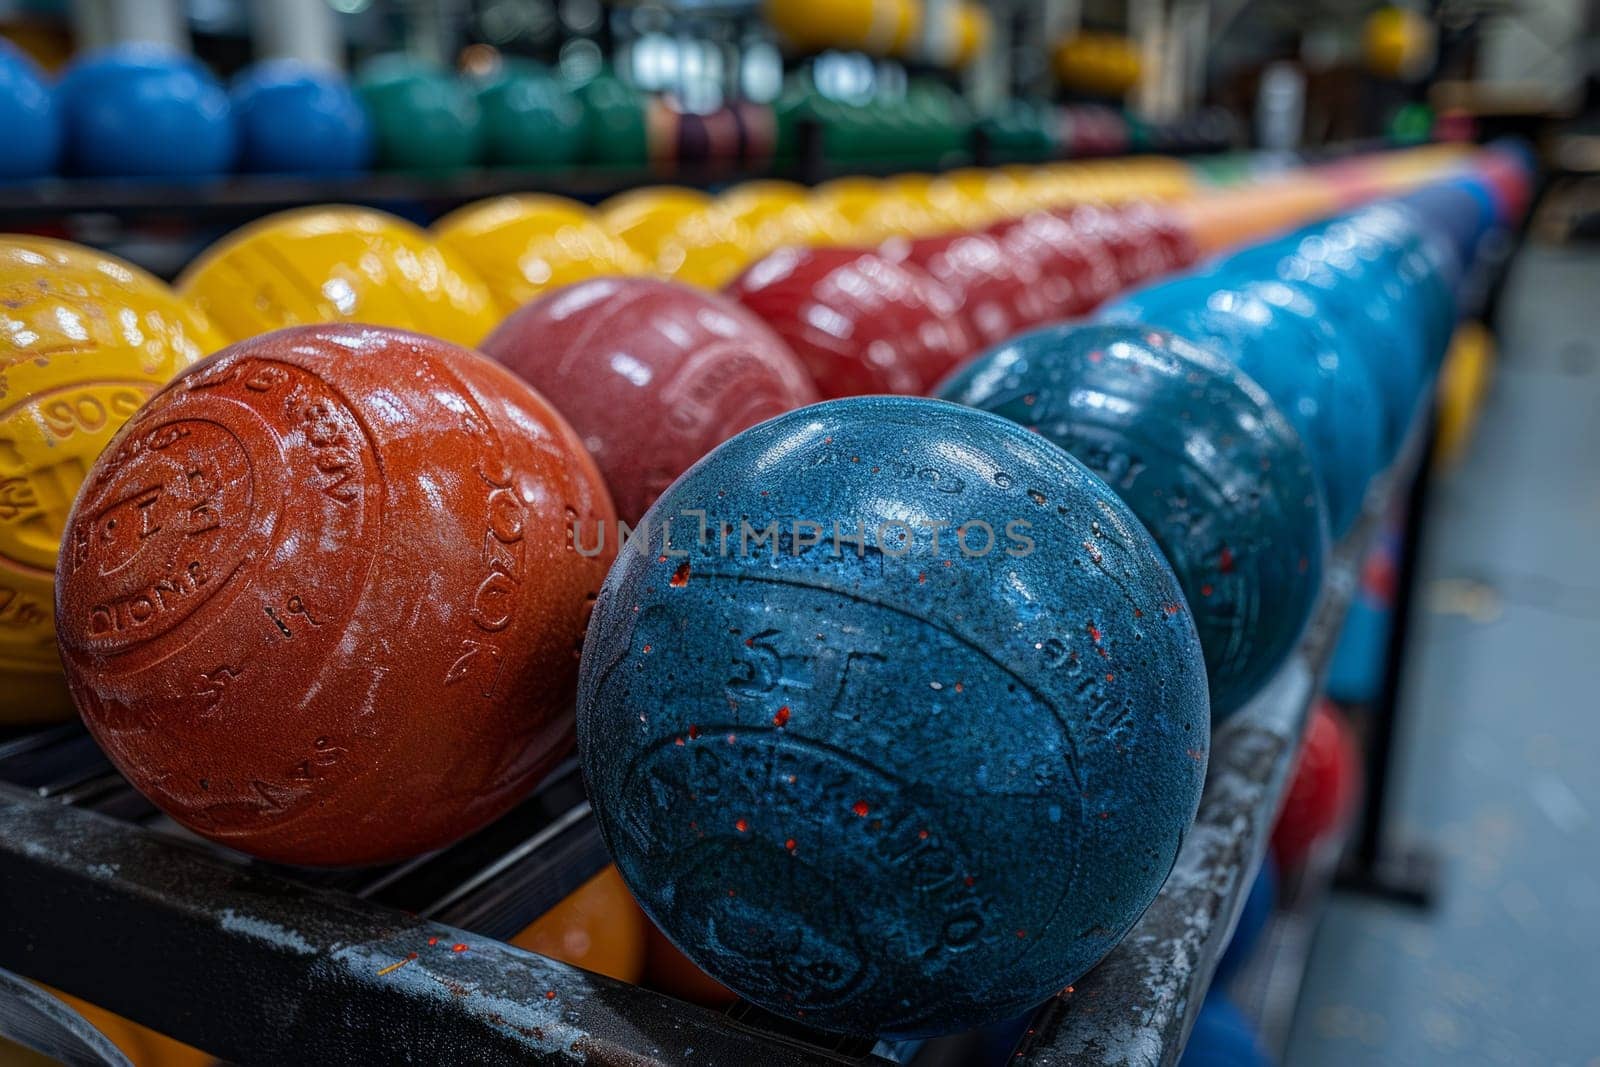 A collection of colorful fitness balls elegantly perched on a sleek metal rack, creating a vibrant and playful display.